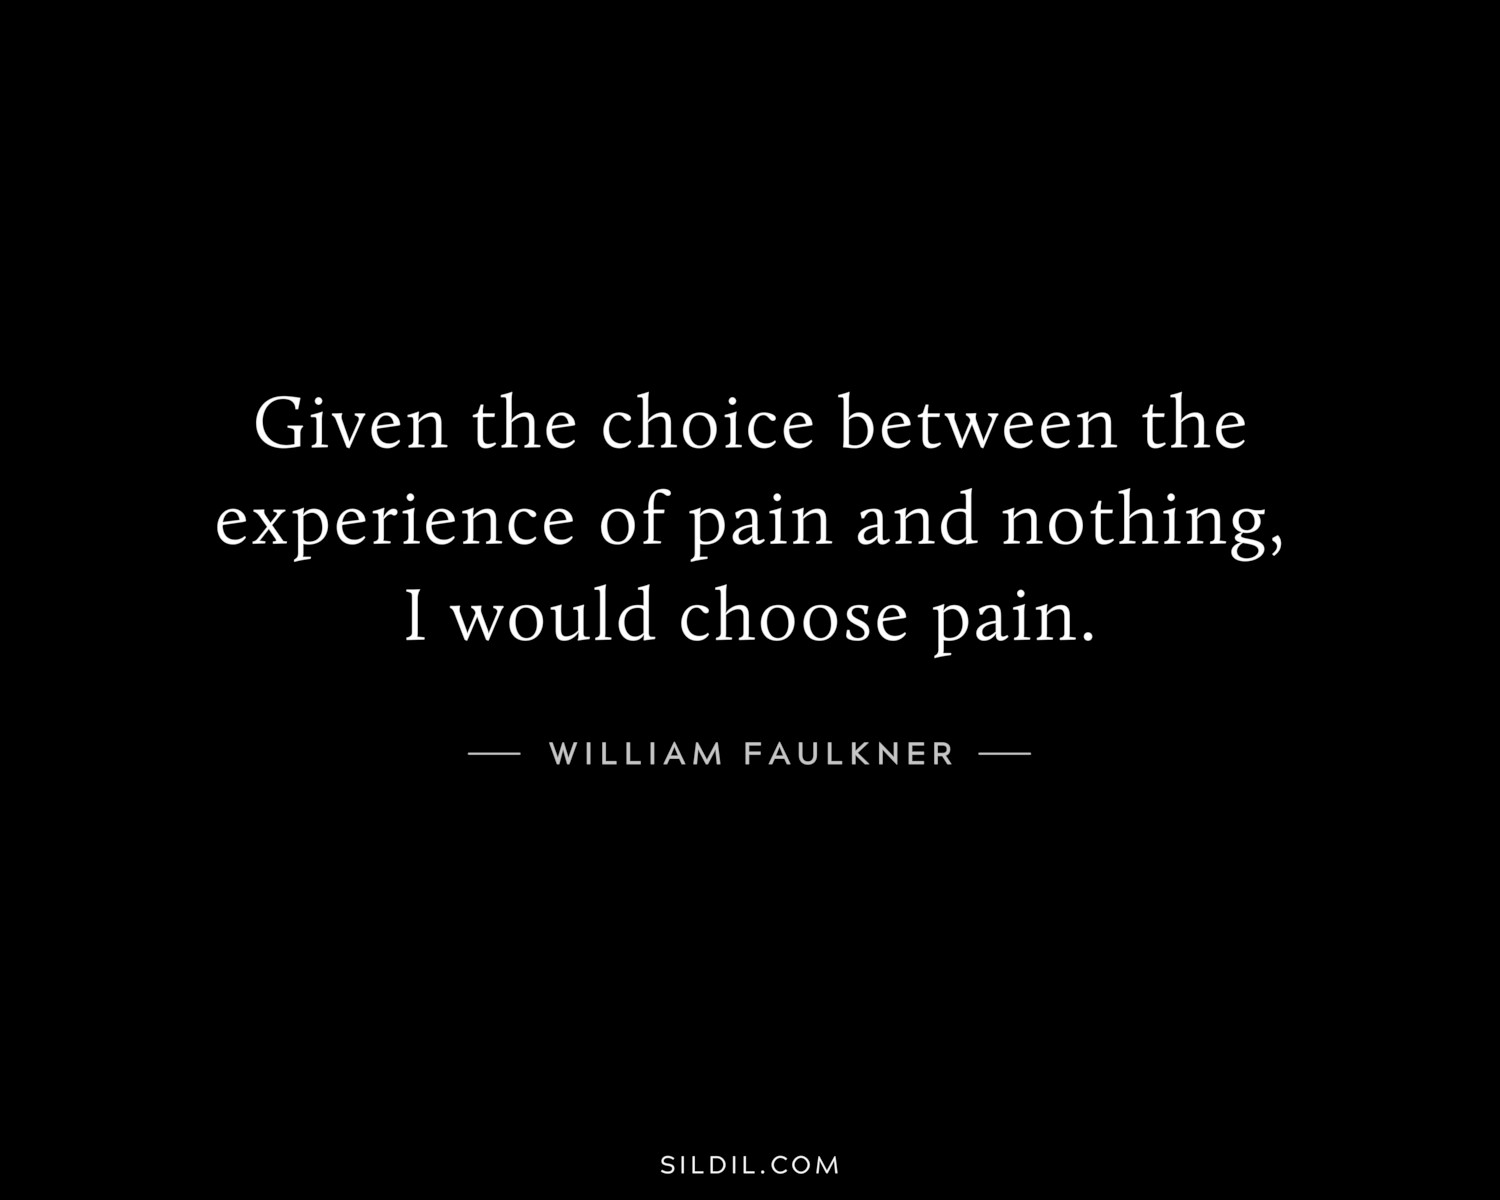 Given the choice between the experience of pain and nothing, I would choose pain.